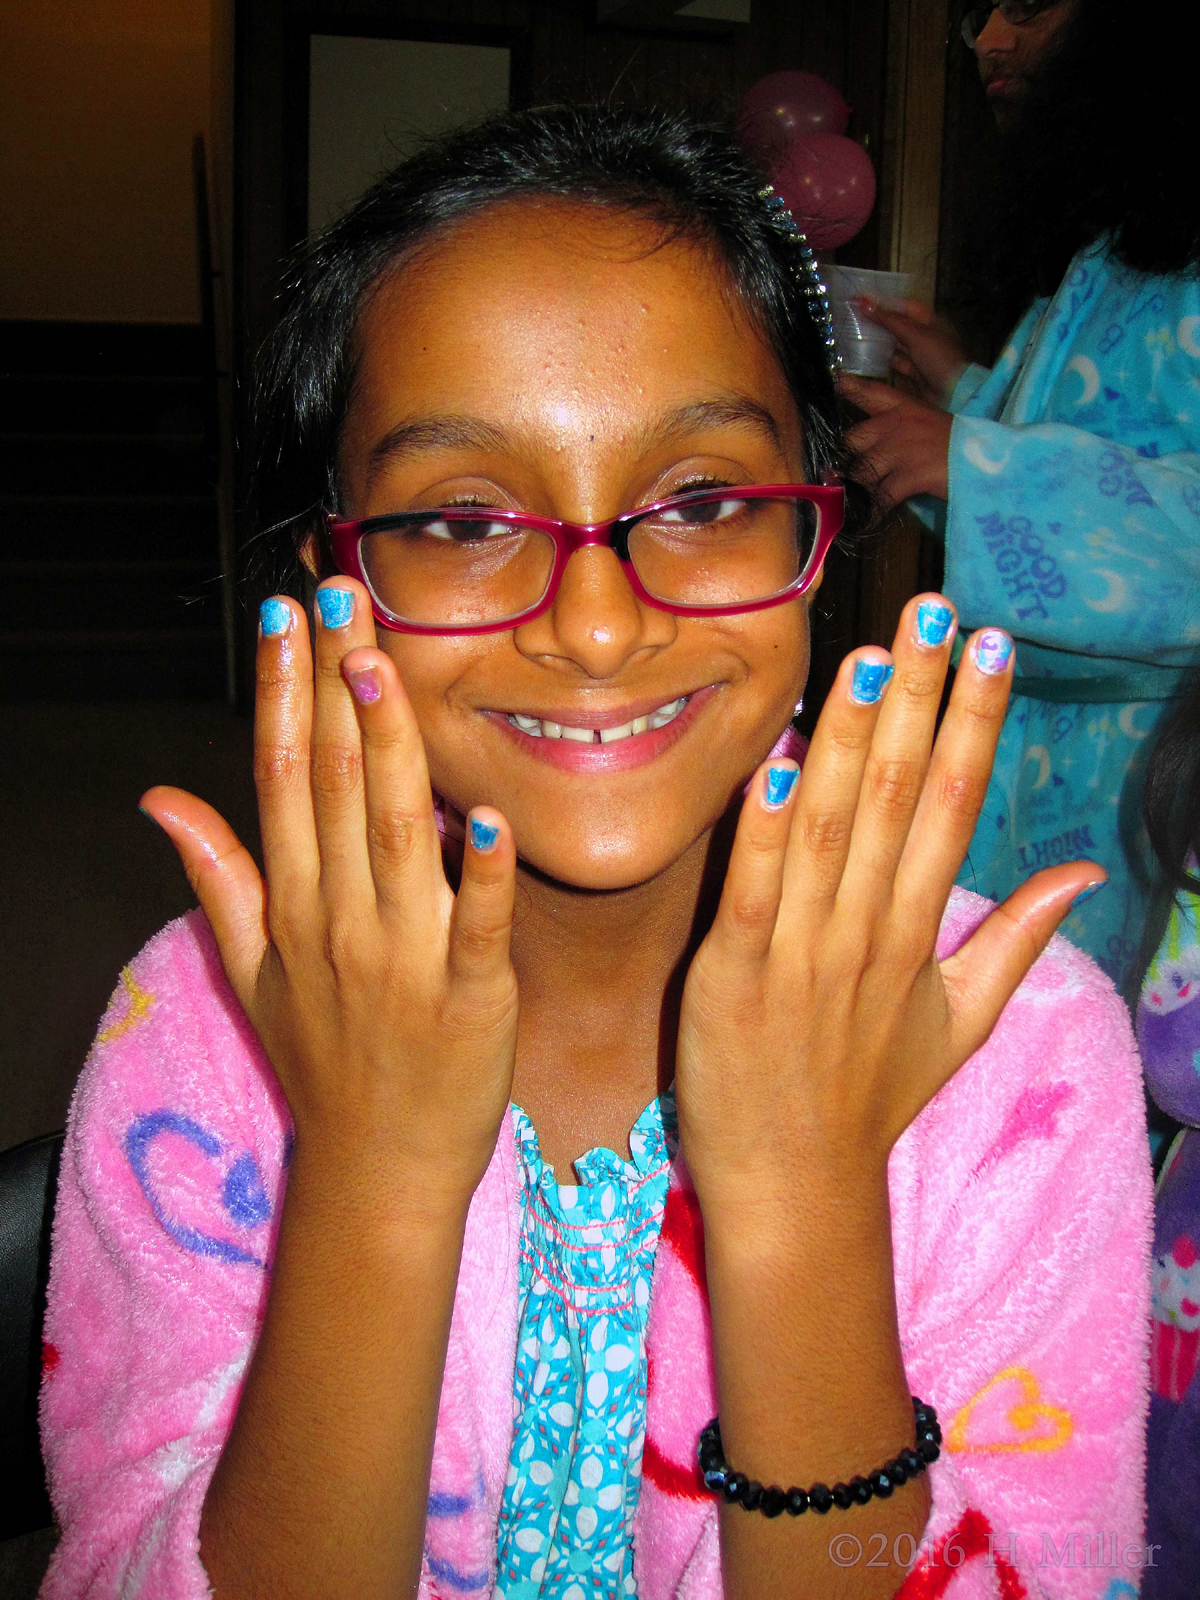 She Is Loving Her New Girls Manicure! 